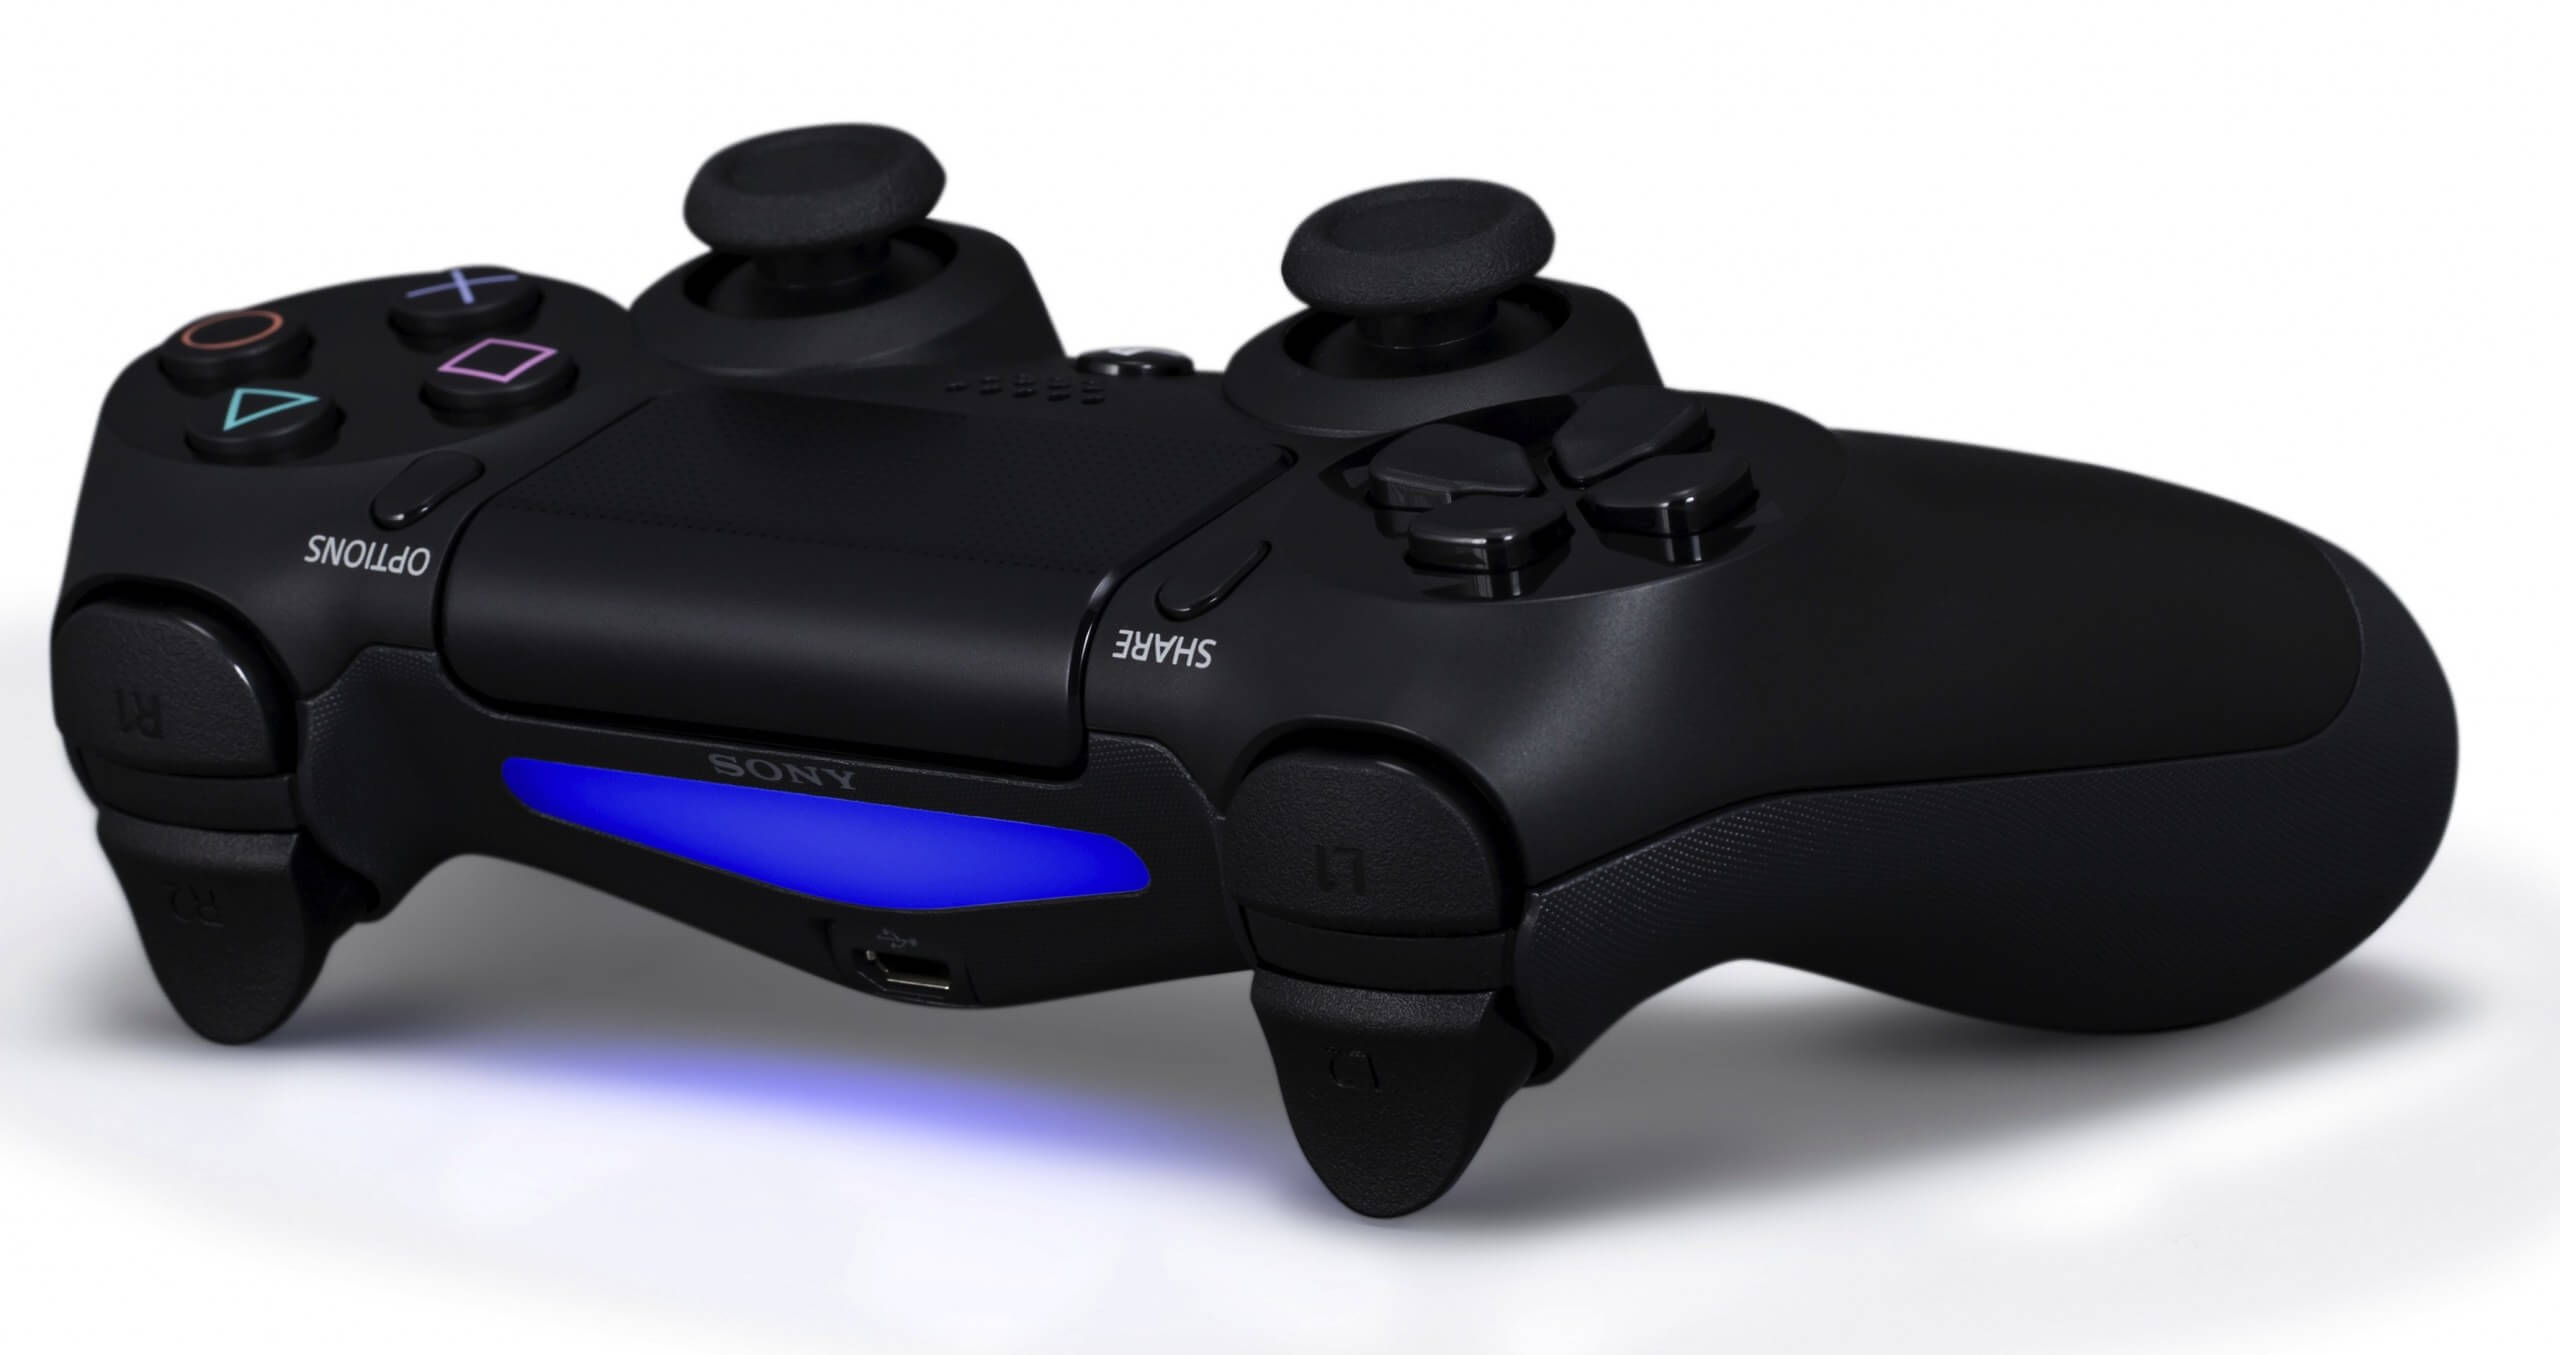 Sony patent reveals it may be considering integrating its back-button attachment into the next DualShock